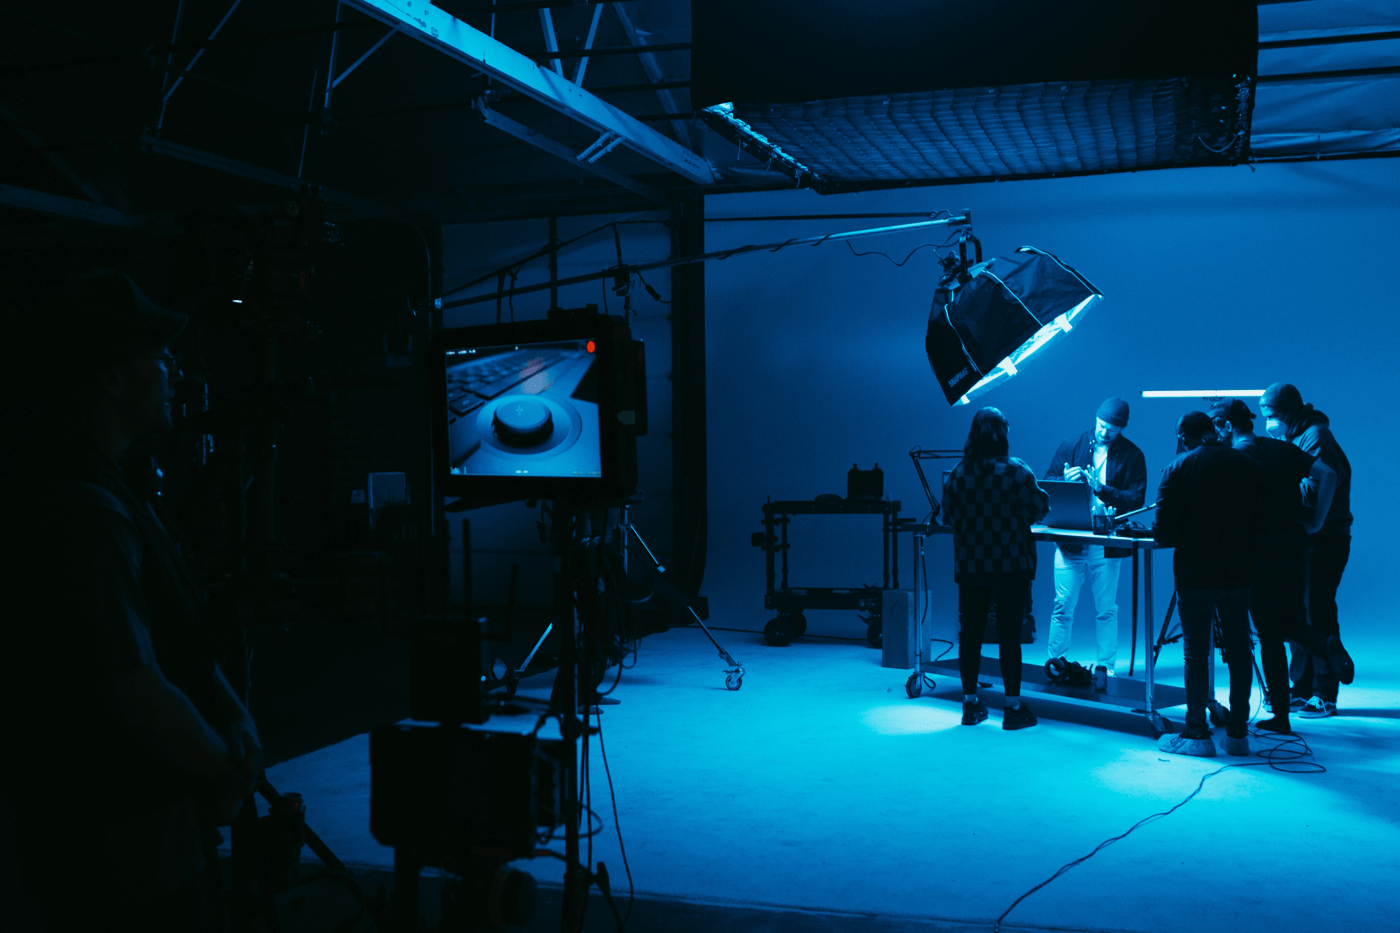 A production shoot where people are surrounded around a table shooting a product in blue lighting